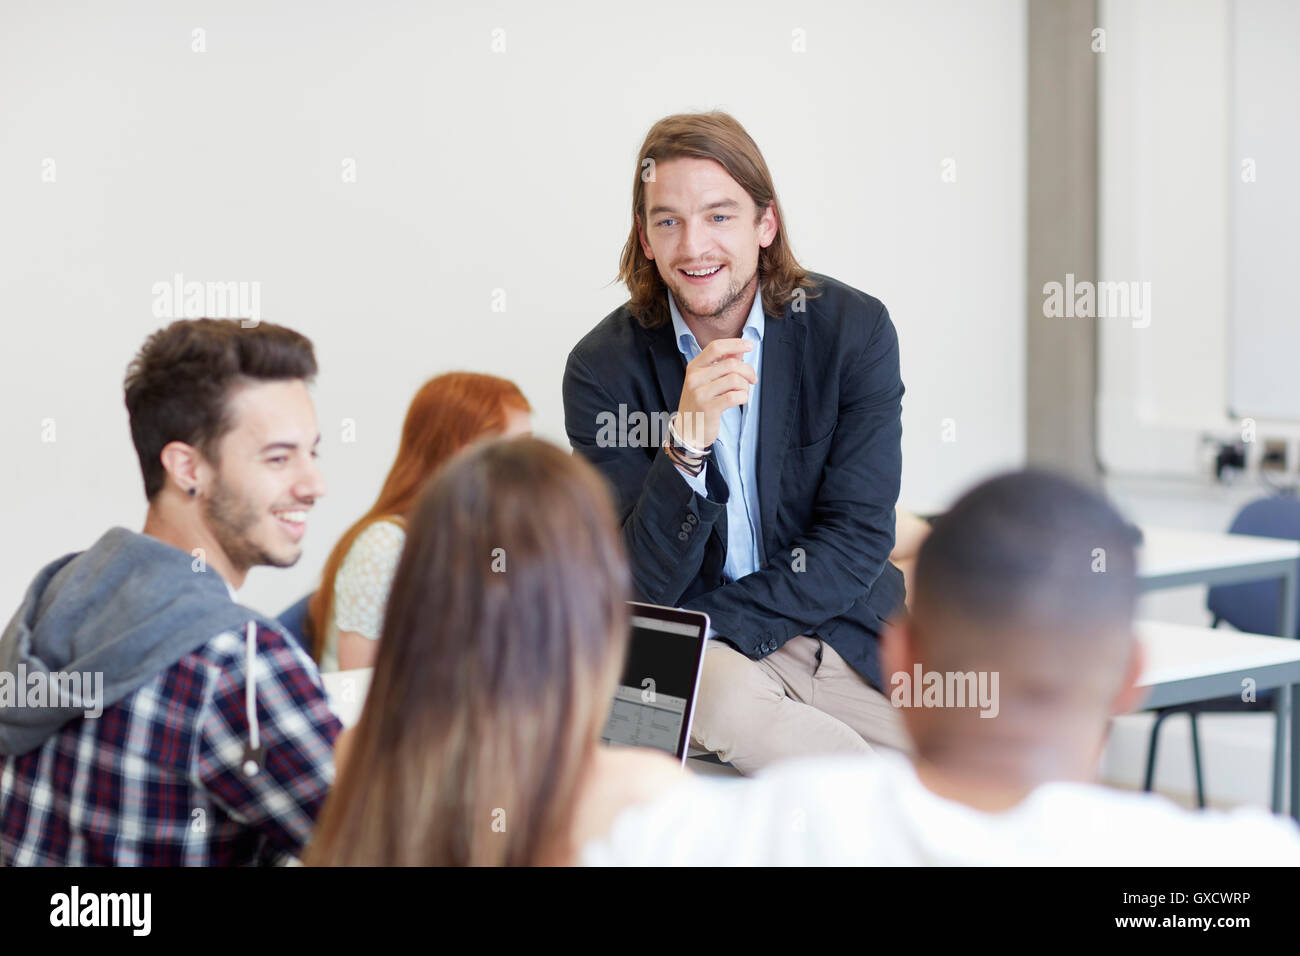 Male lecturer talking to students in higher education college classroom Stock Photo